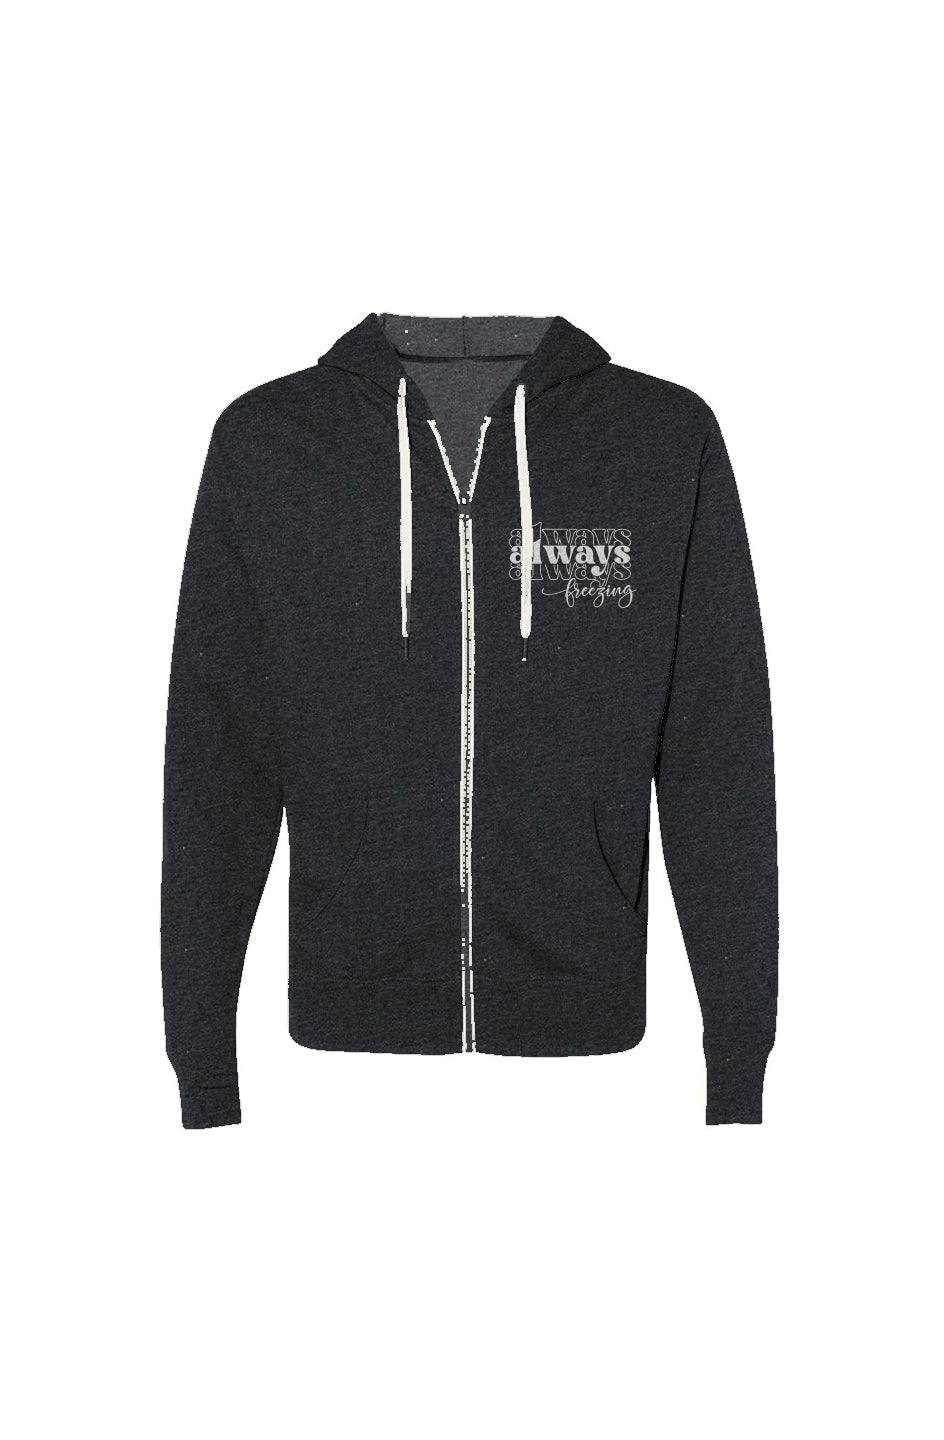 Always Freezing French Terry Zip-Up Hoodie